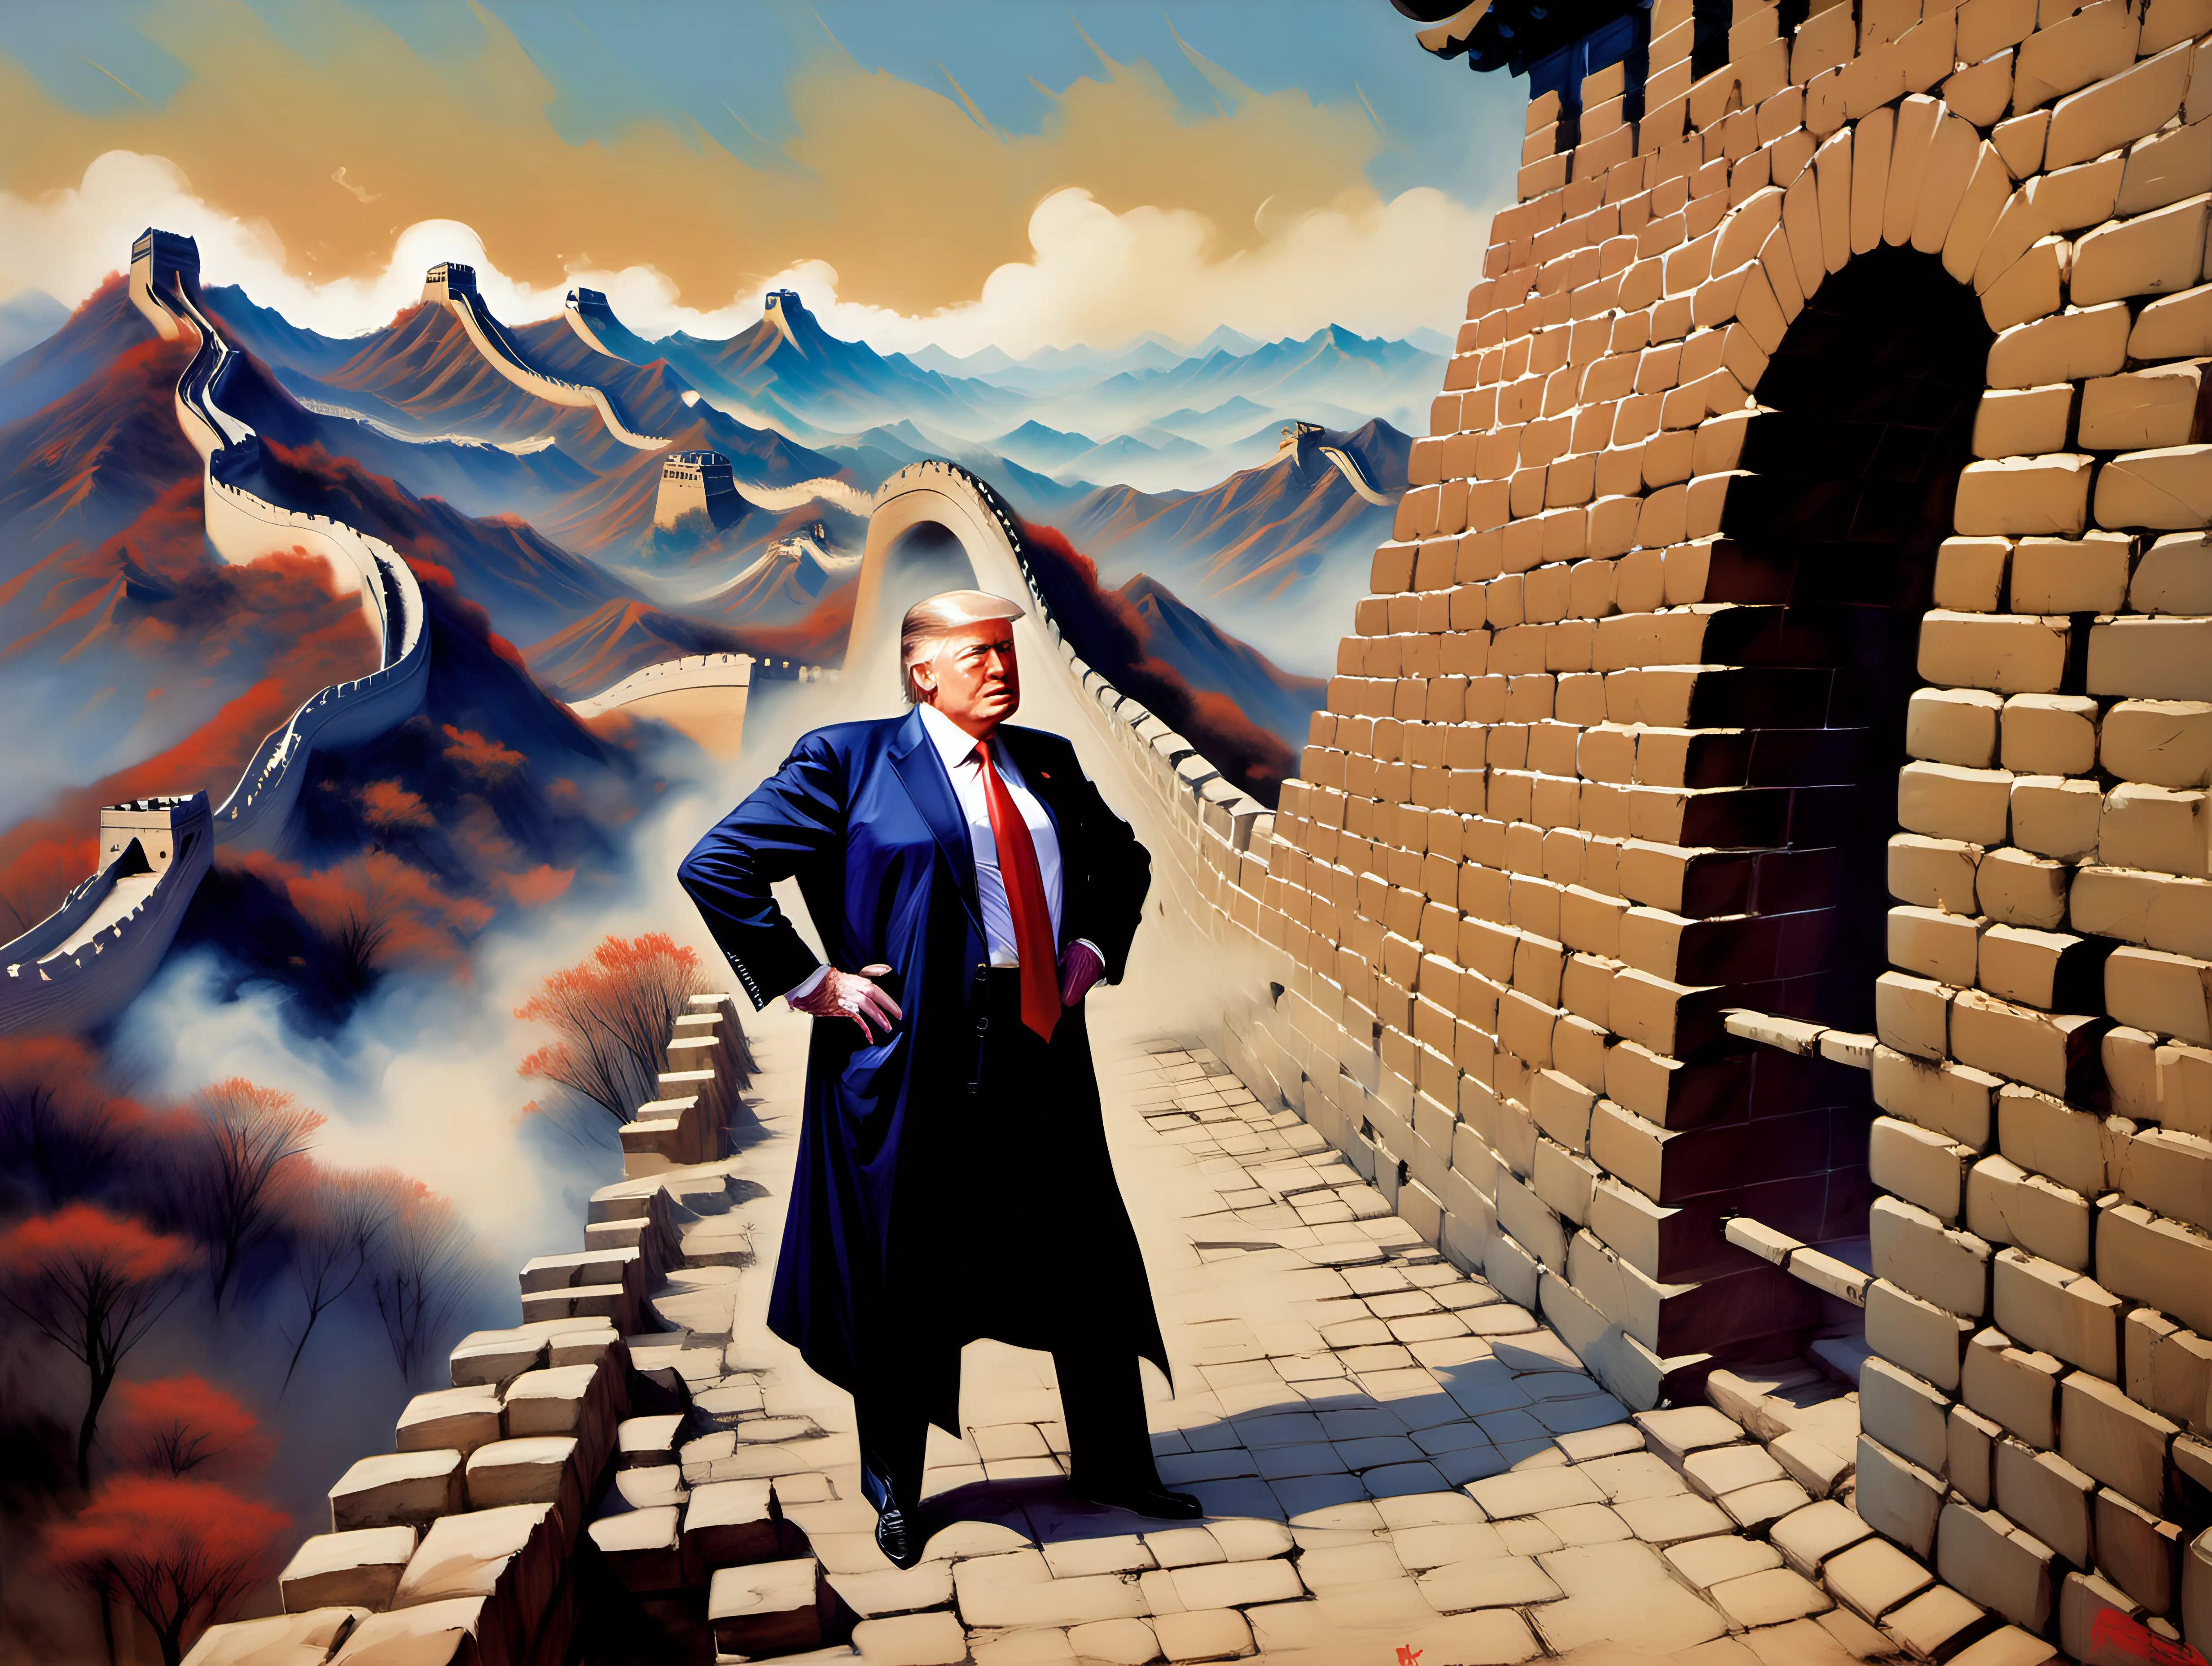 Donald Trump supervising the building of the Great Wall of China Frank Frazetta style